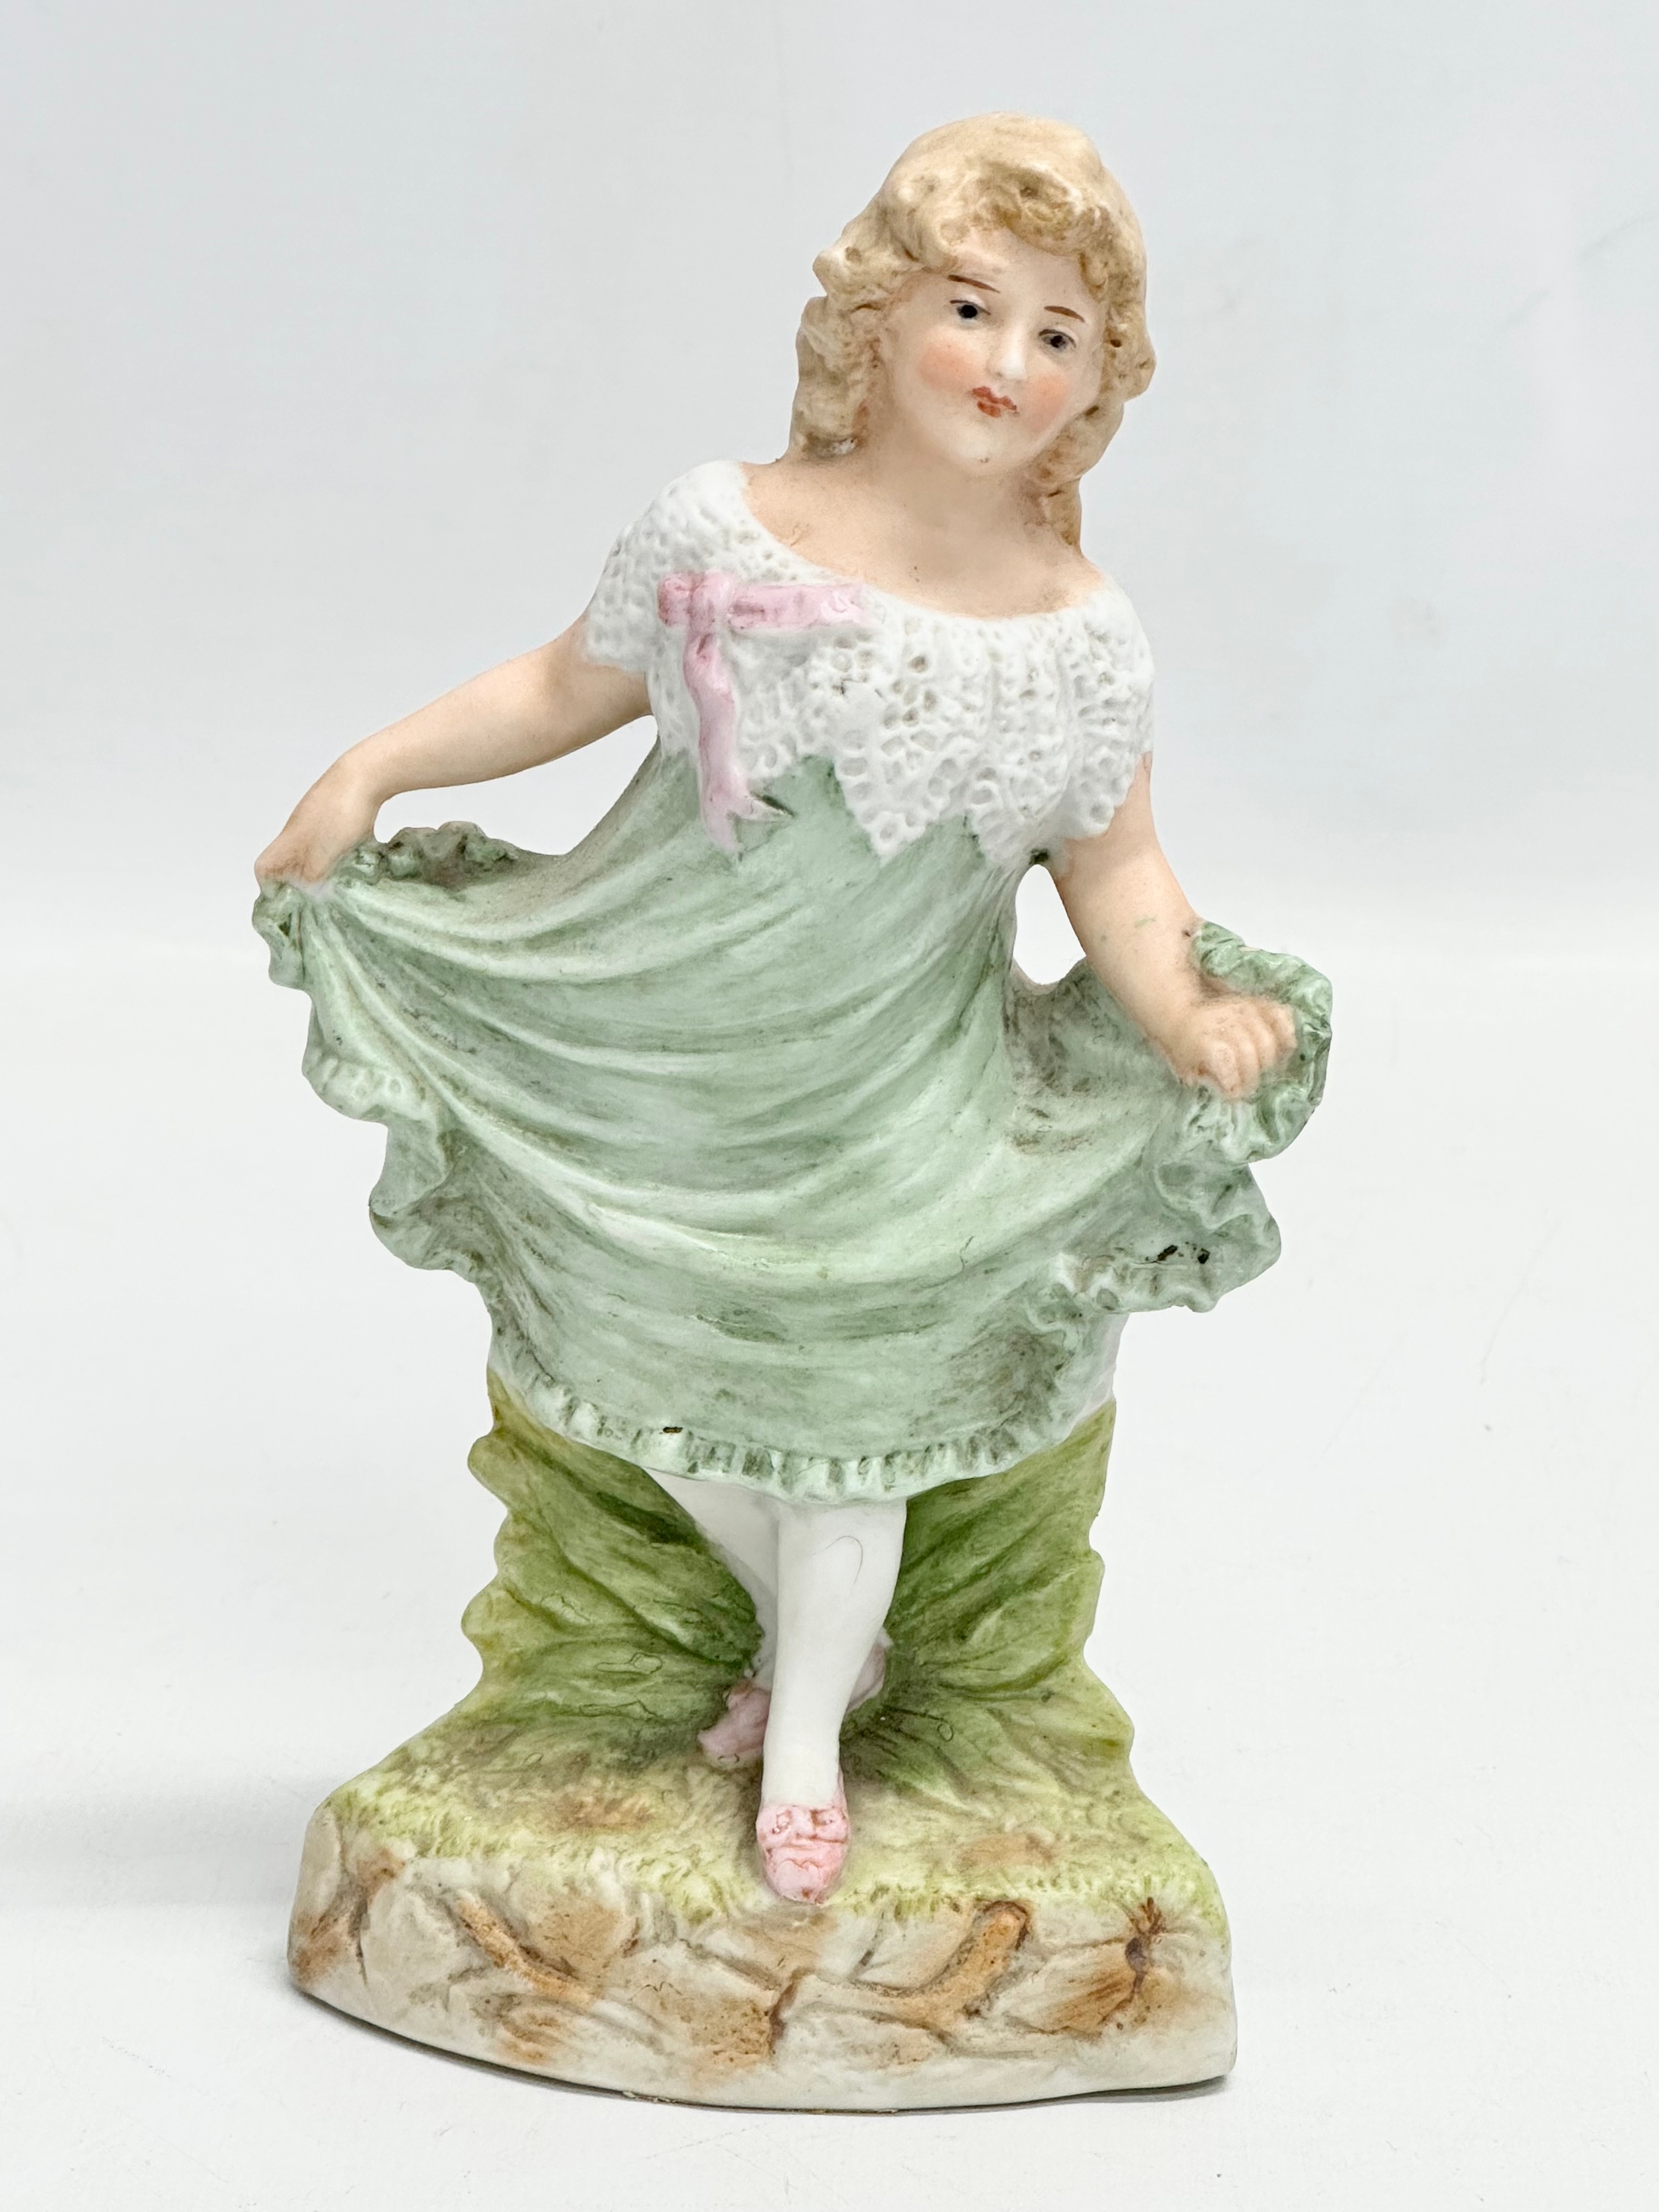 A late 19th century Heubach bisque figurine. 17cm